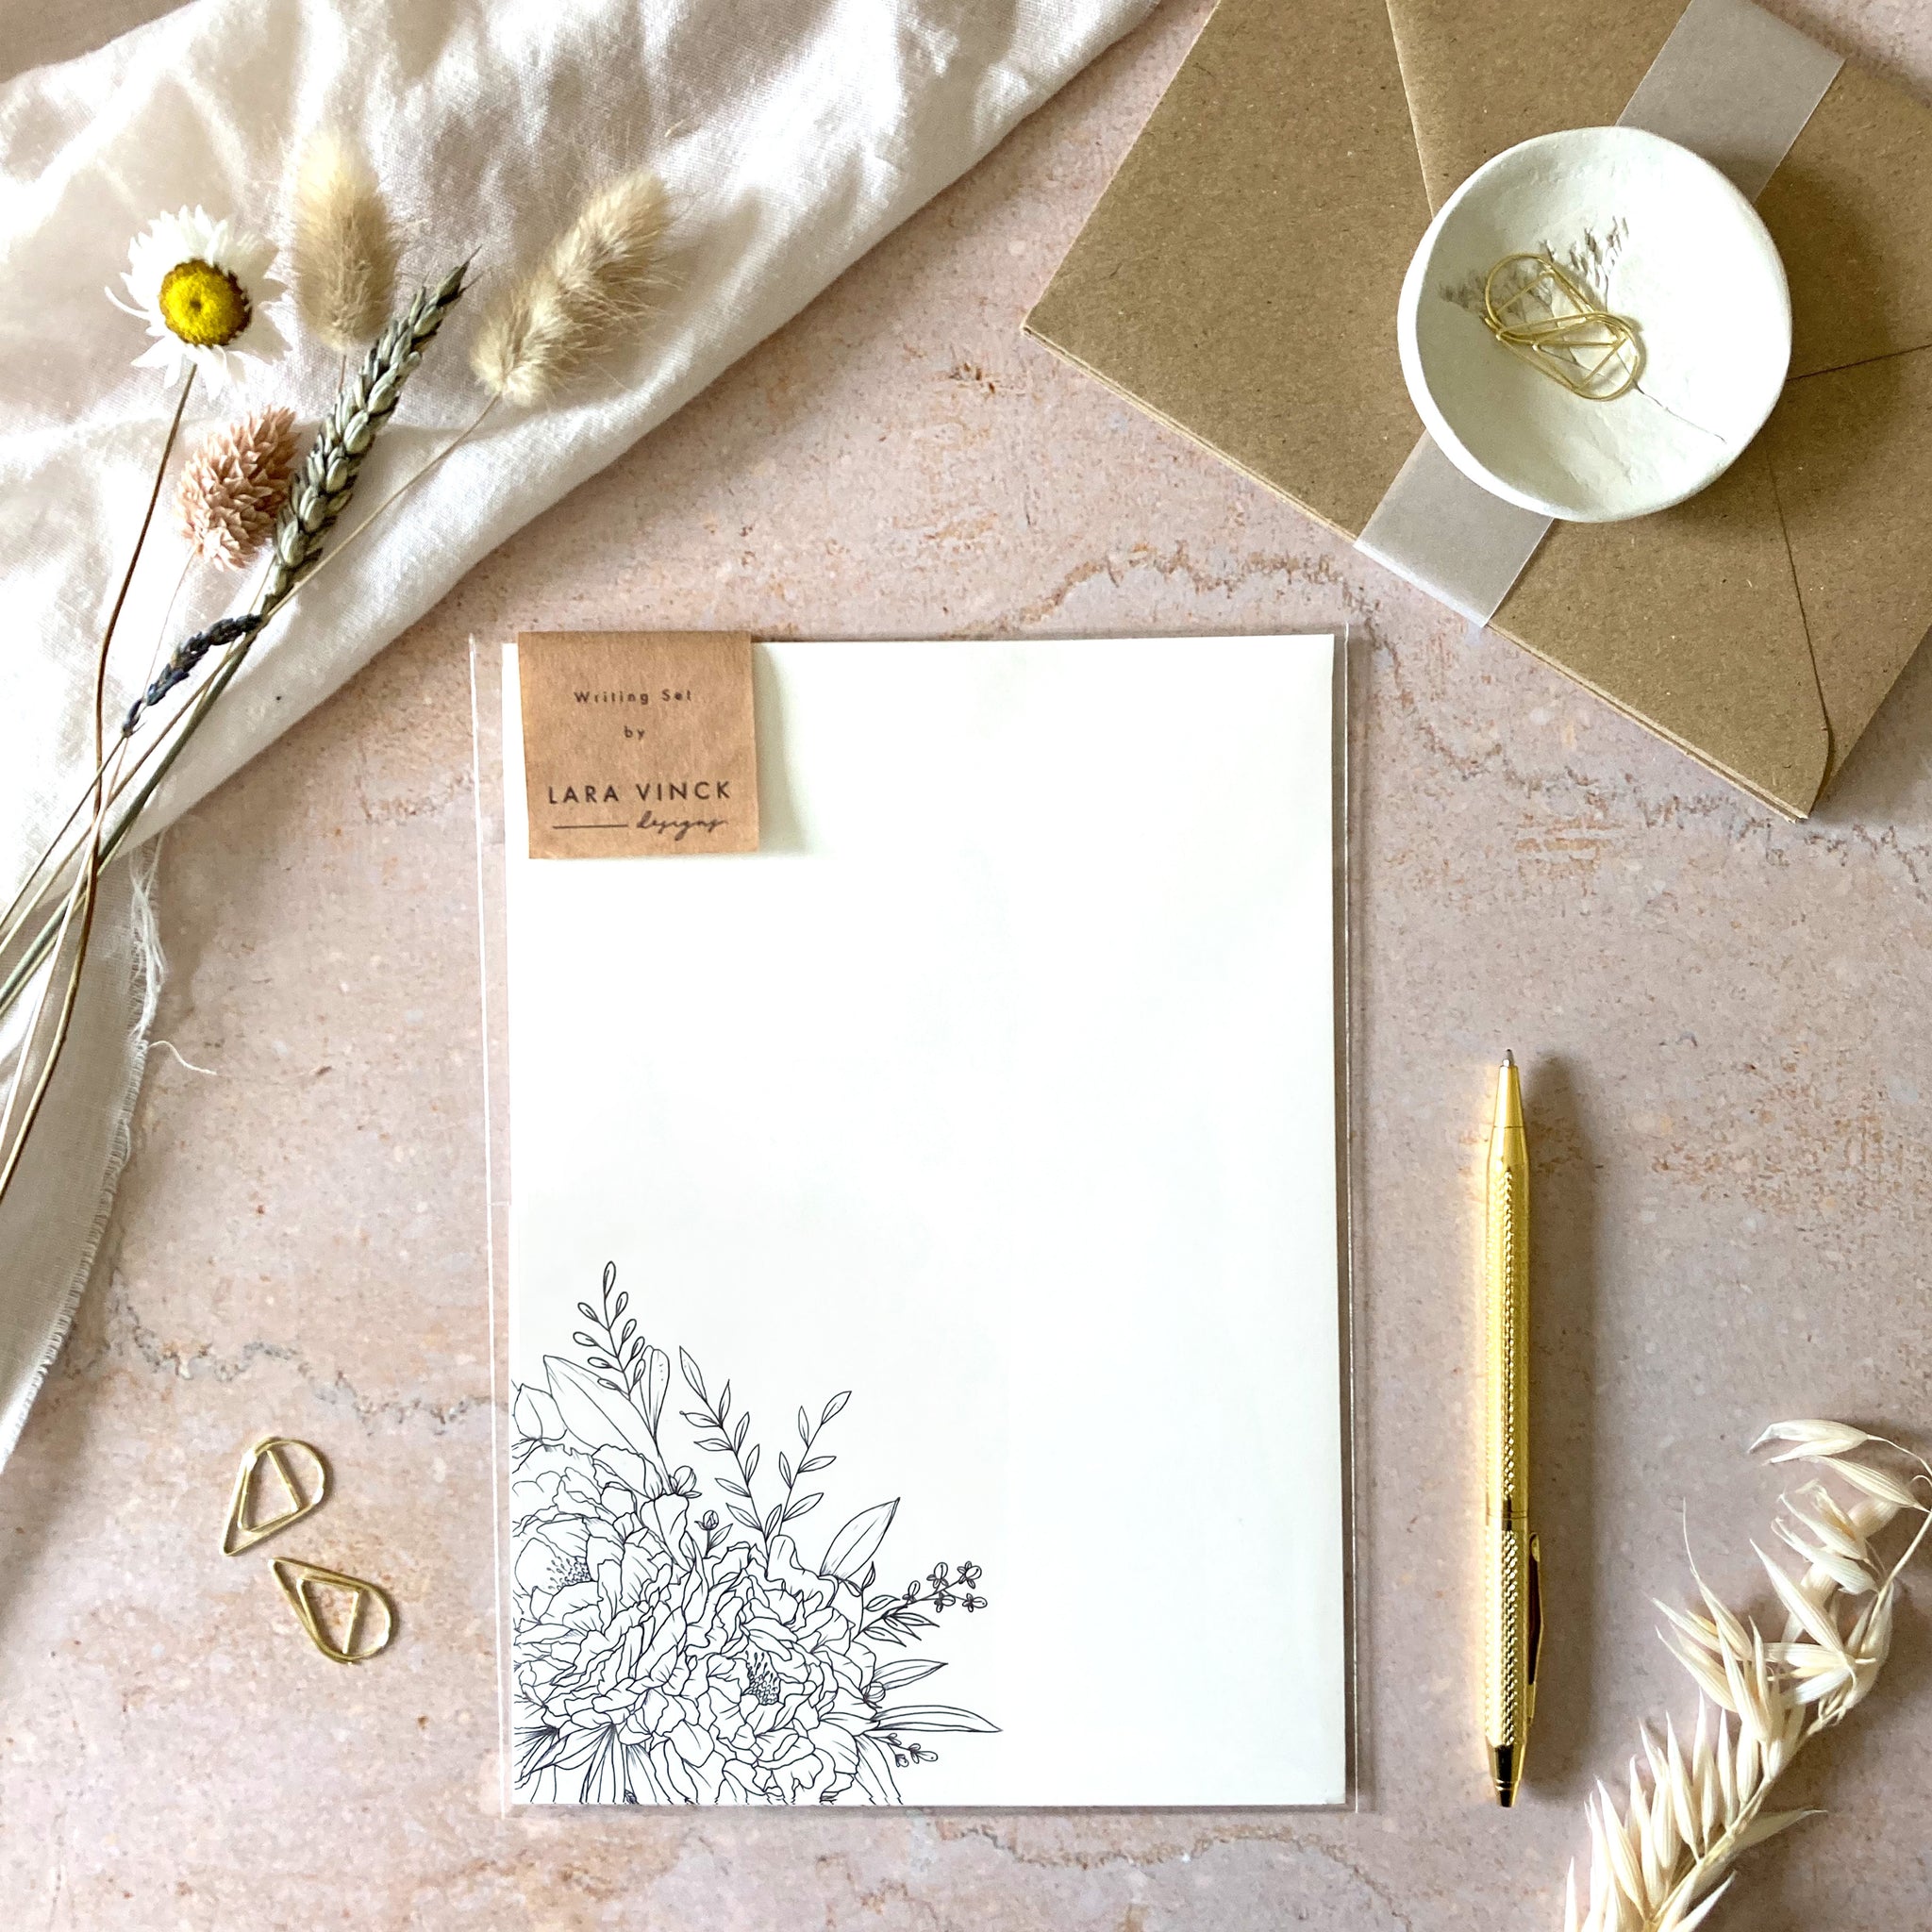 Peonies Writing Set/ Writing Paper with Envelopes/Letter Writing Set/Gifts for Wildflower Lovers/Snail Mail/Writing and Luxury Paper Pack